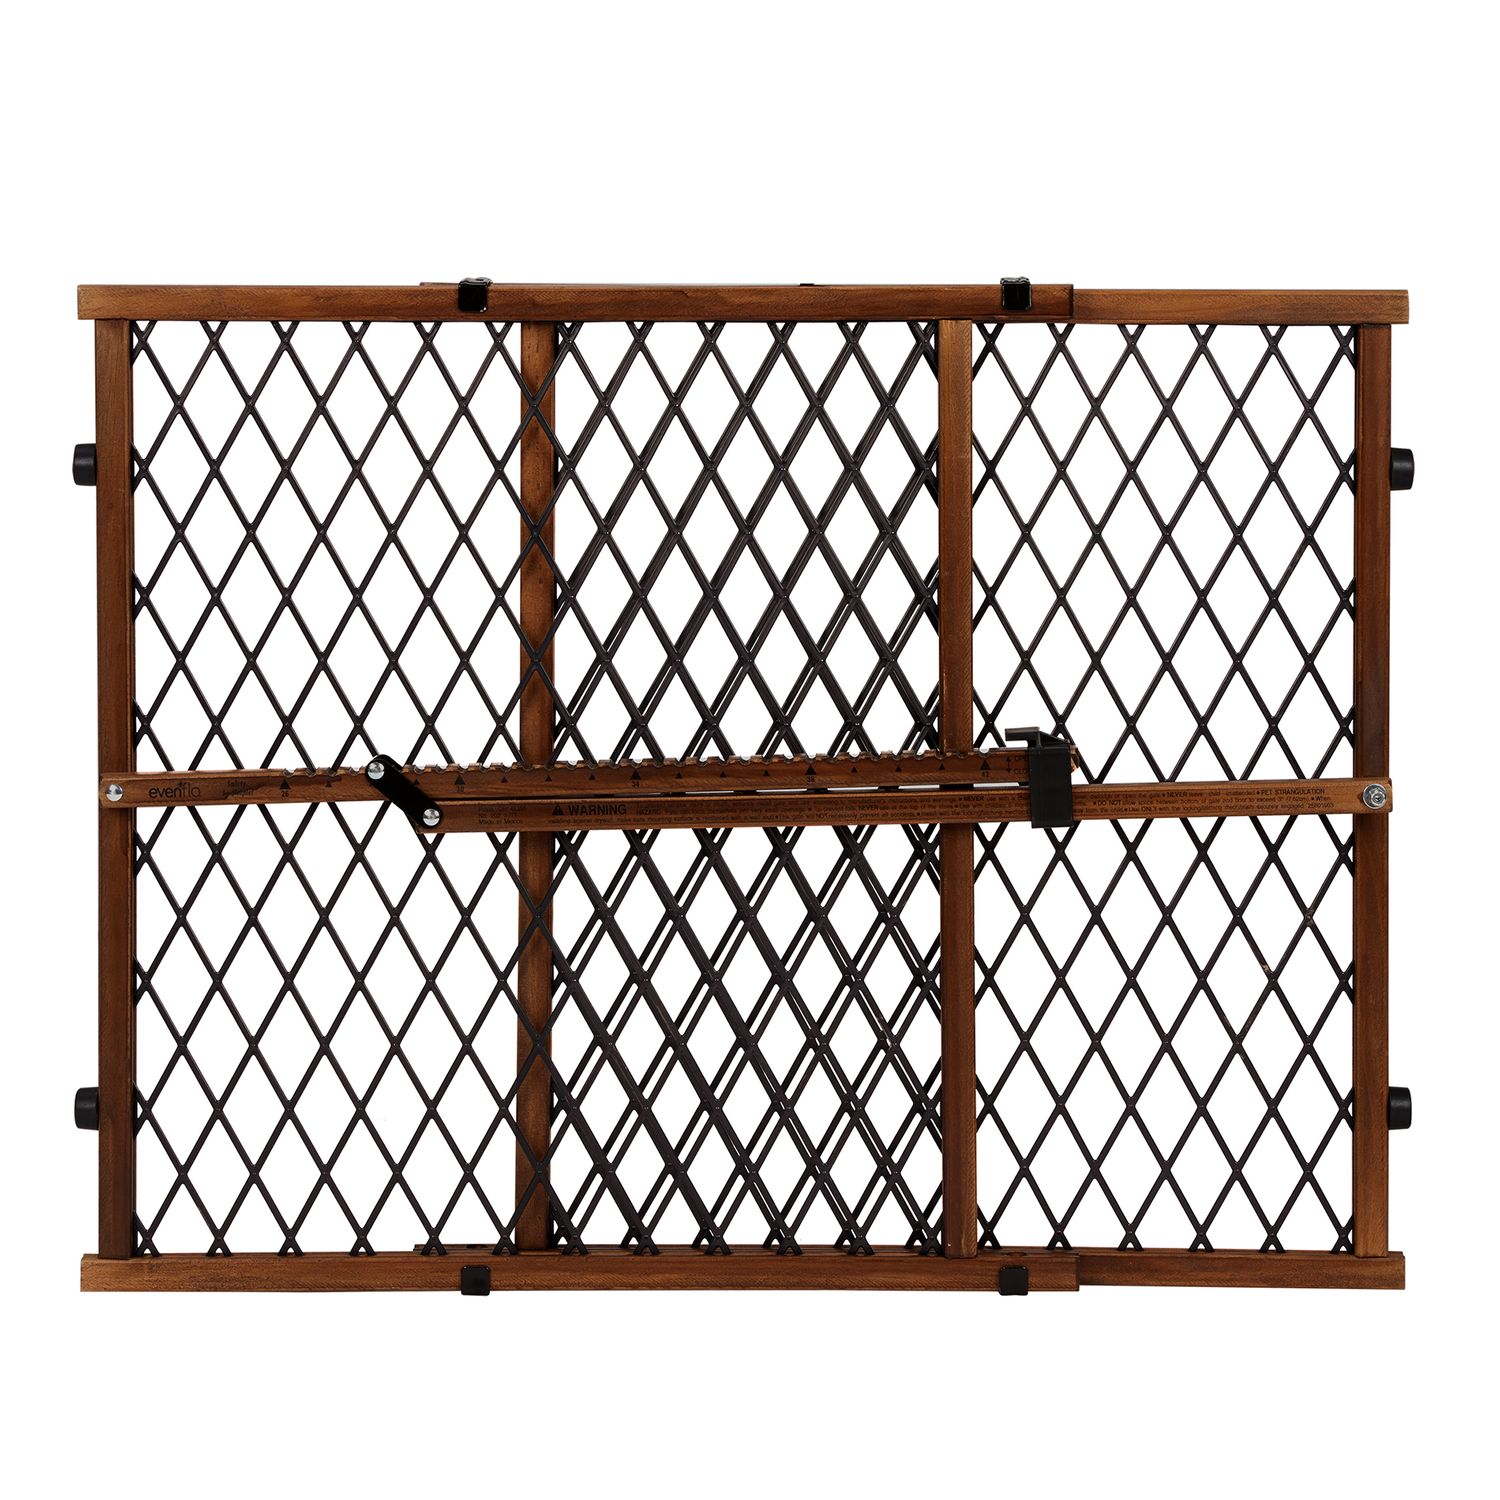 evenflo expansion swing gate